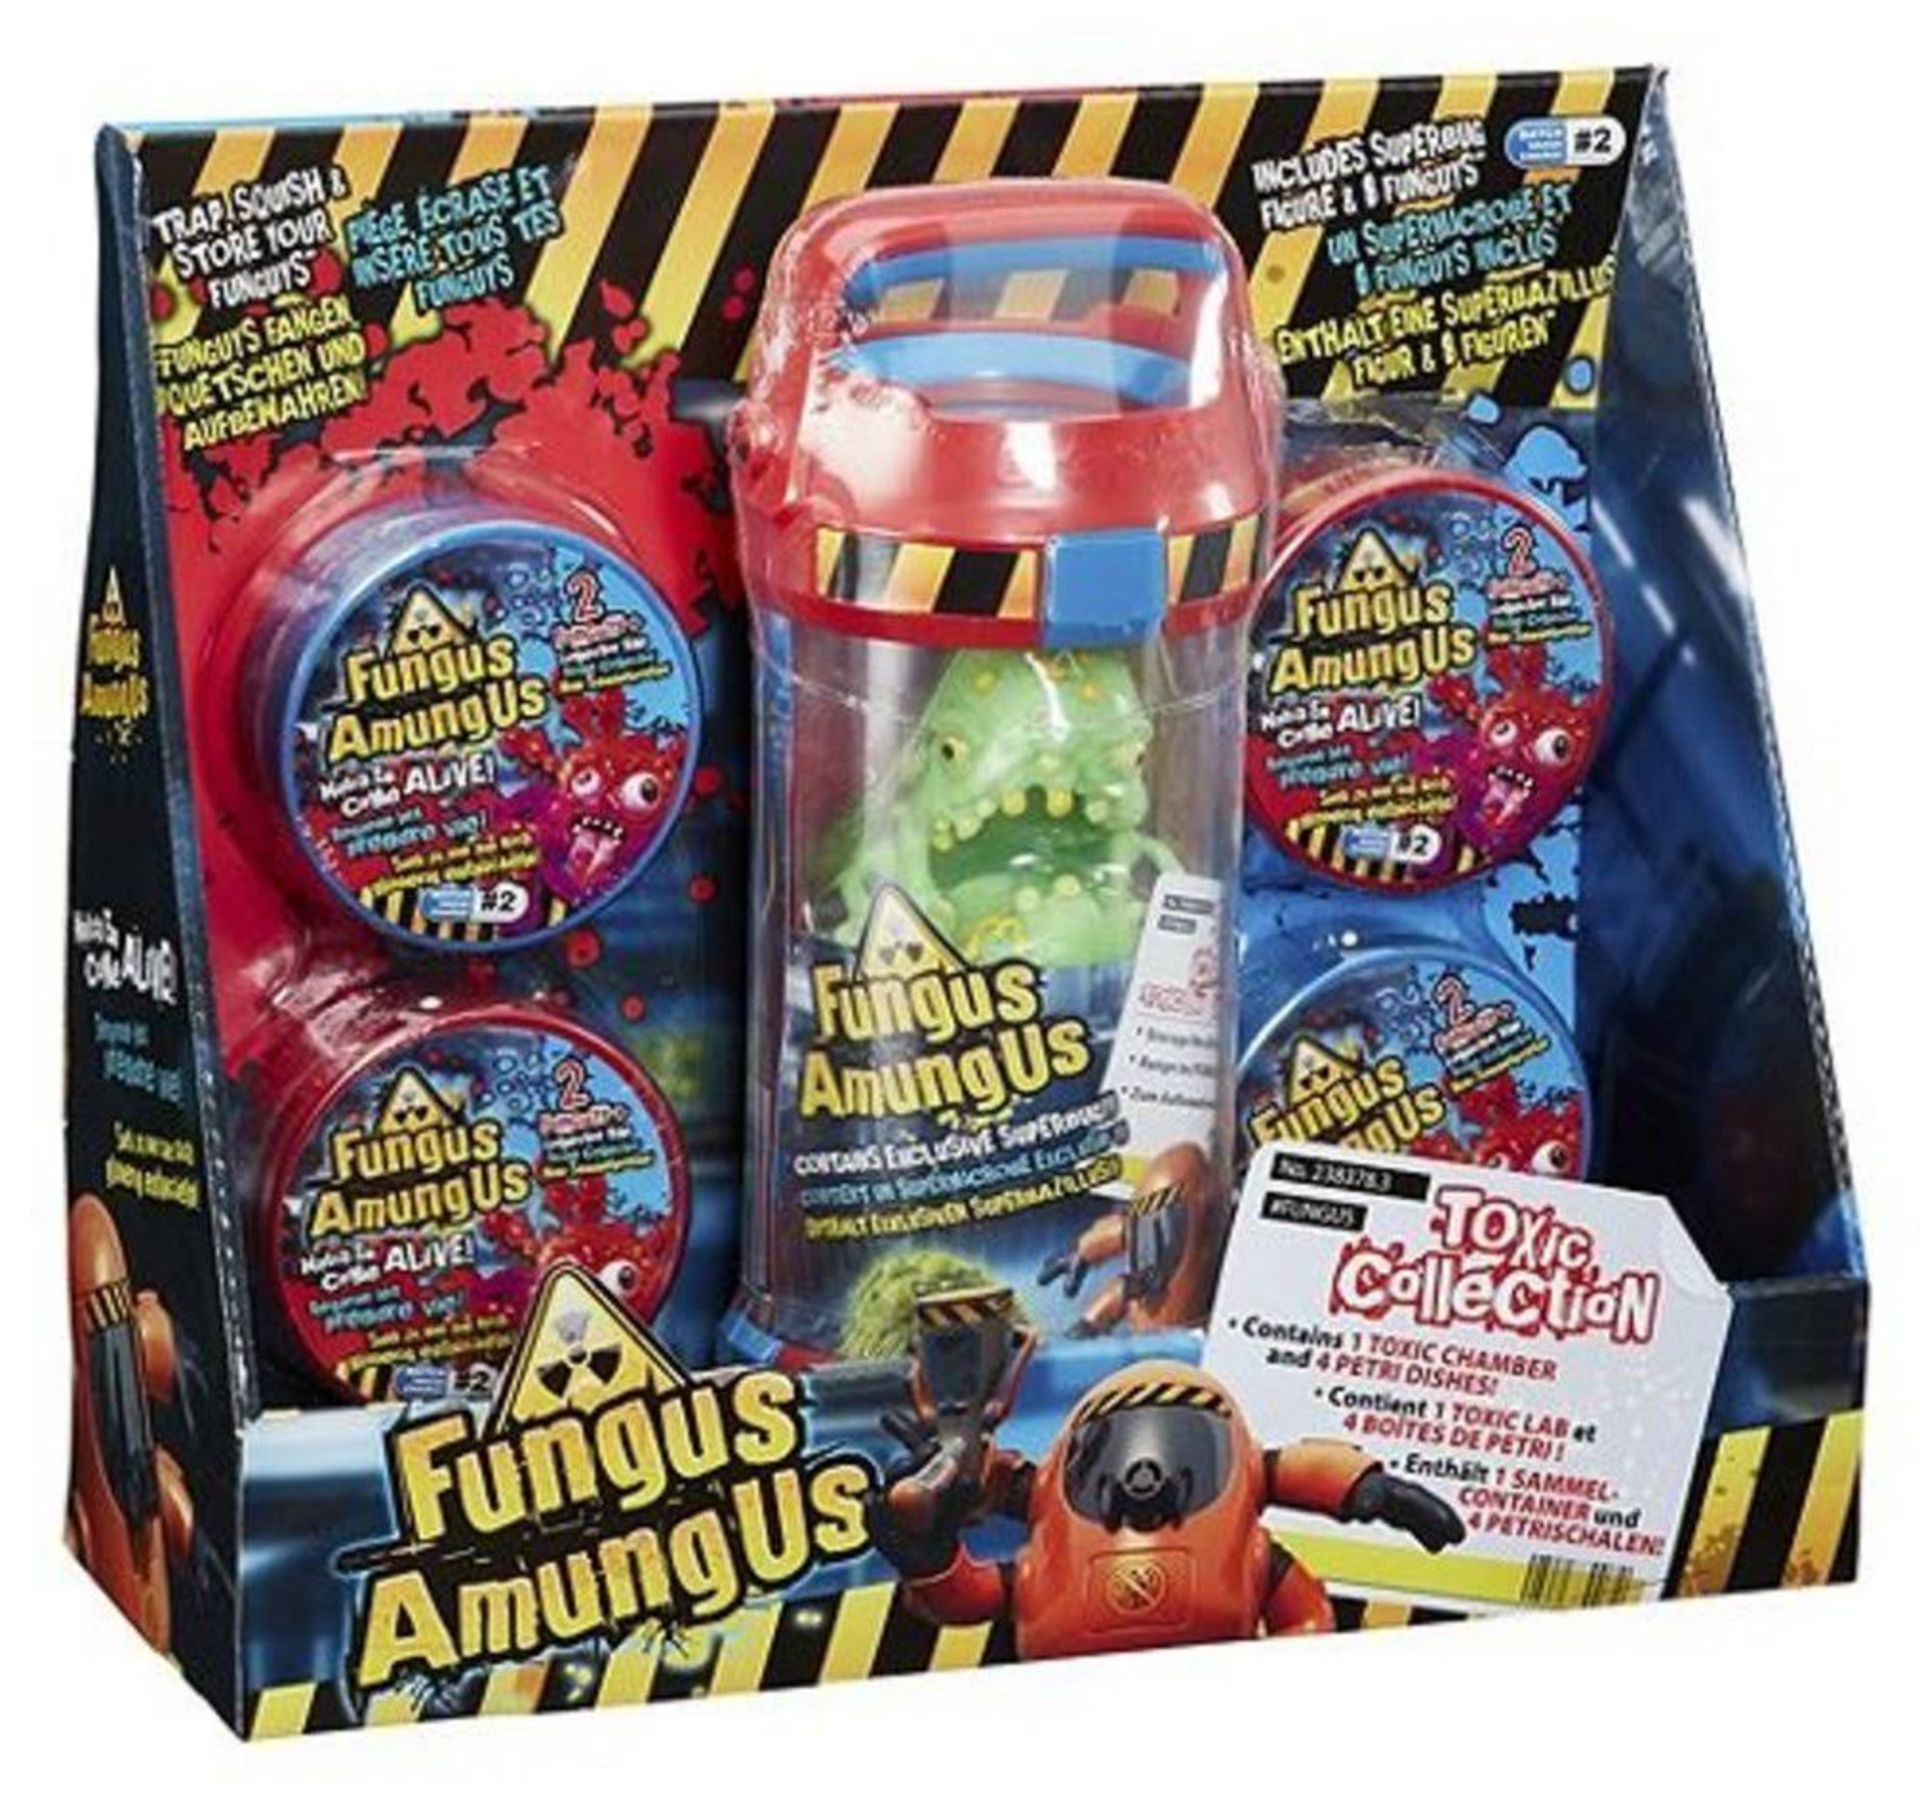 V *TRADE QTY* Brand New Fungus Amungus Toxic Collection ISP Up To £24.99 (Ebay) X 4 YOUR BID PRICE